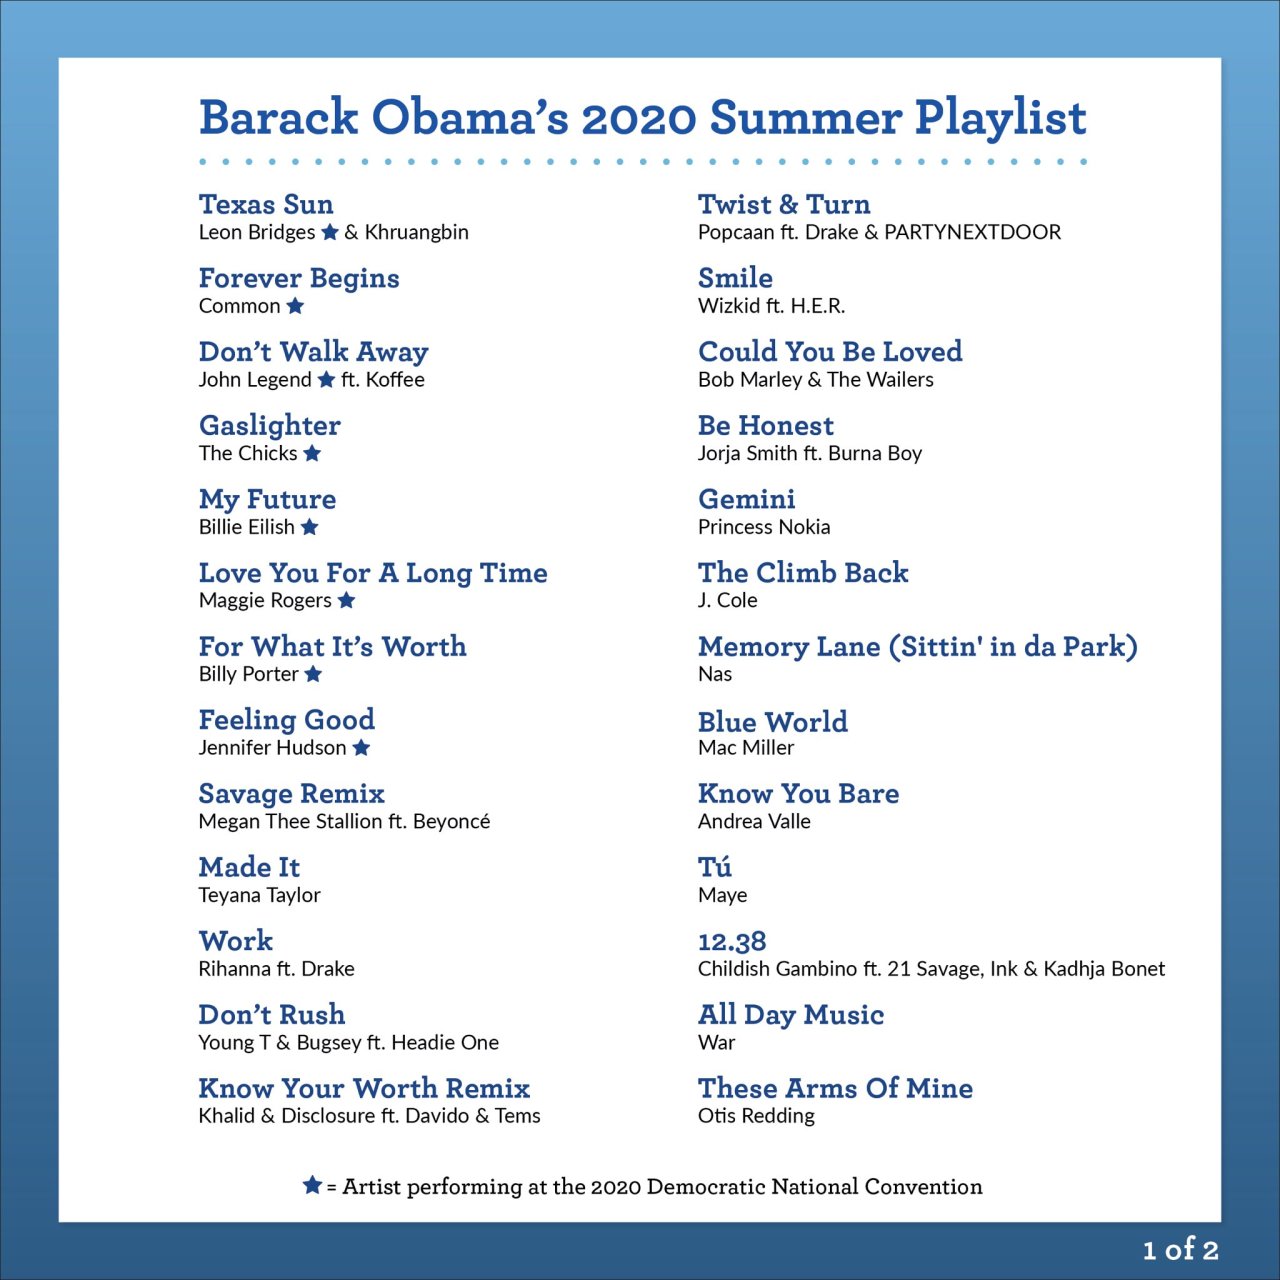 Barack Obama Featured “12.38″ by Childish Gambino in His 2020 Summer Playlist
“12.38″ by Childish Gambino ft. 21 Savage, Ink and Kadhja Bonet released earlier this year as a part of Gambino’s album “3.15.20″
Click here to view Obama’s full...